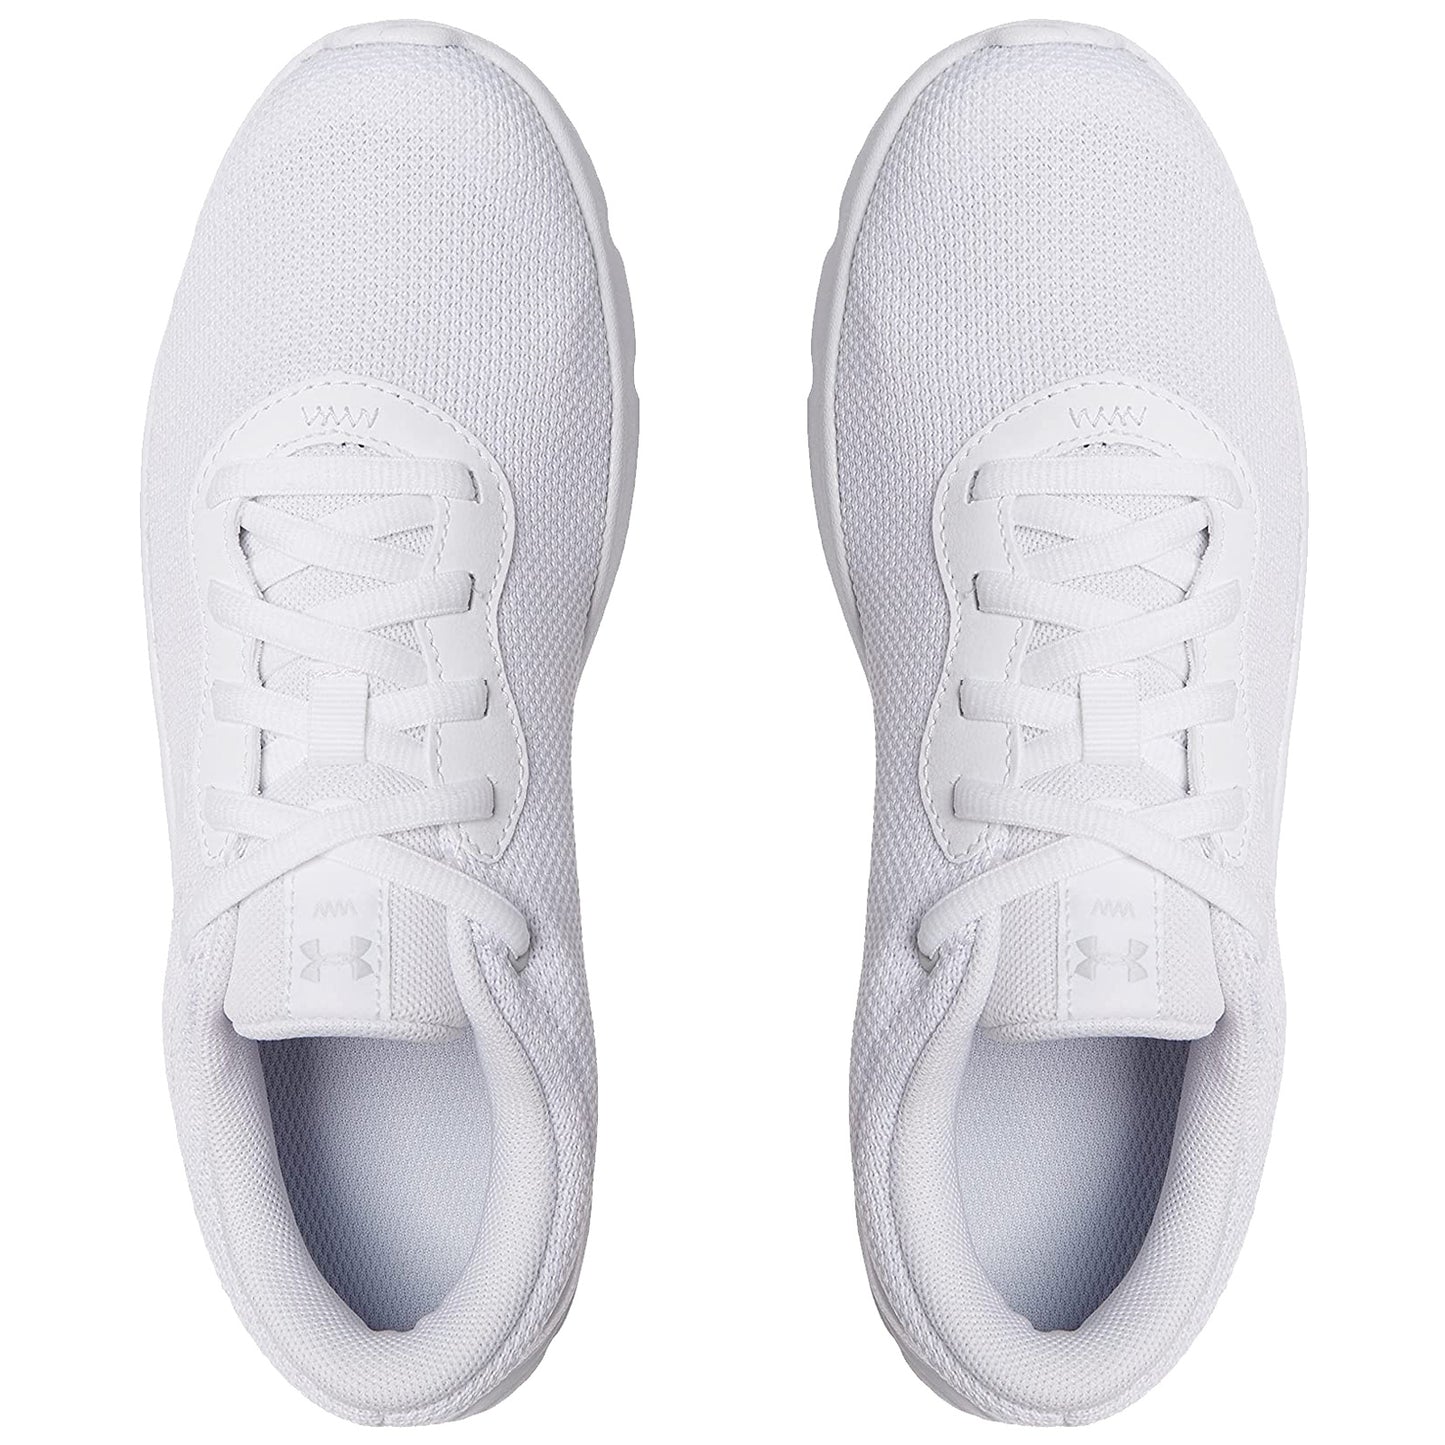 Under Armour Ladies Mojo 2 Sportstyle Trainers